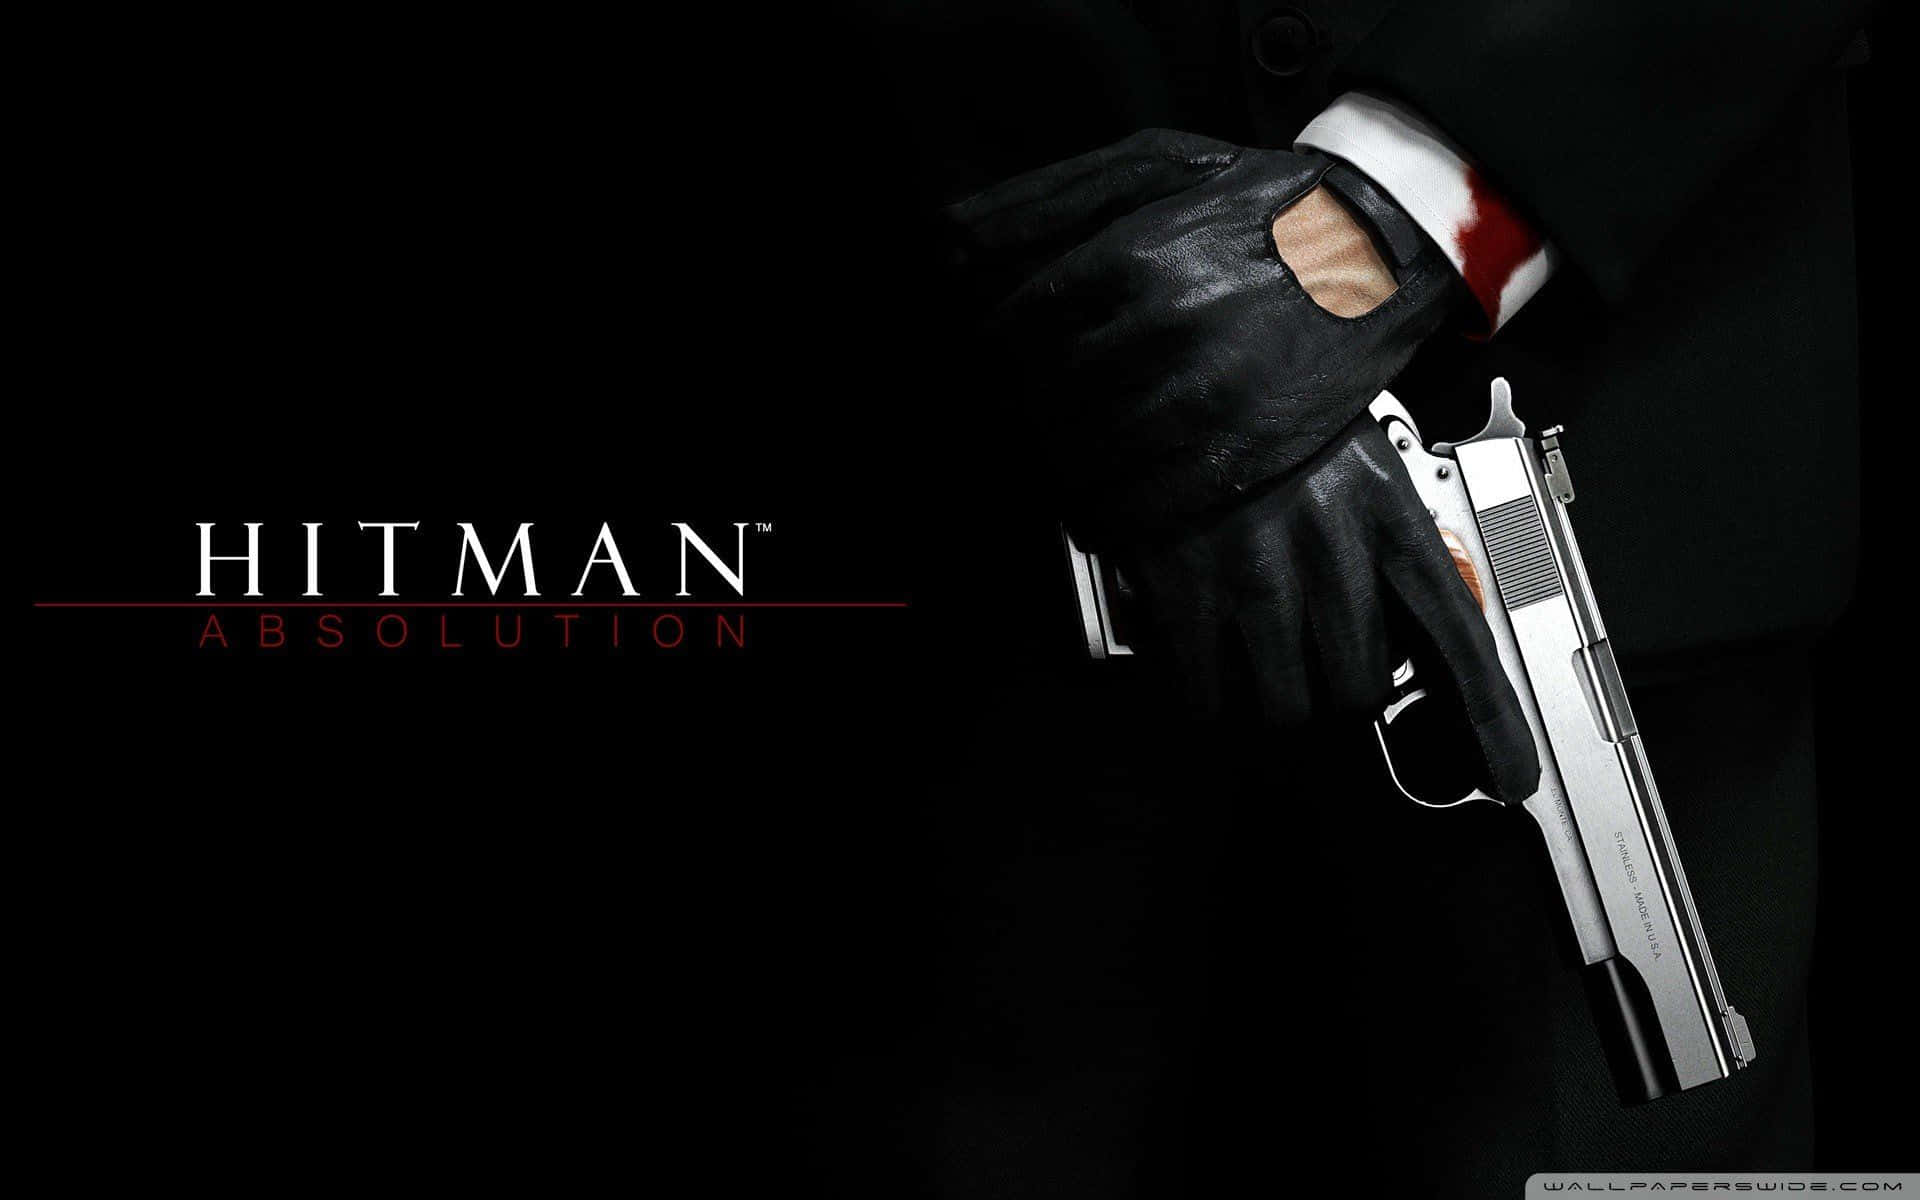 Hitman Agent 47 is ready to take down his enemies. Wallpaper